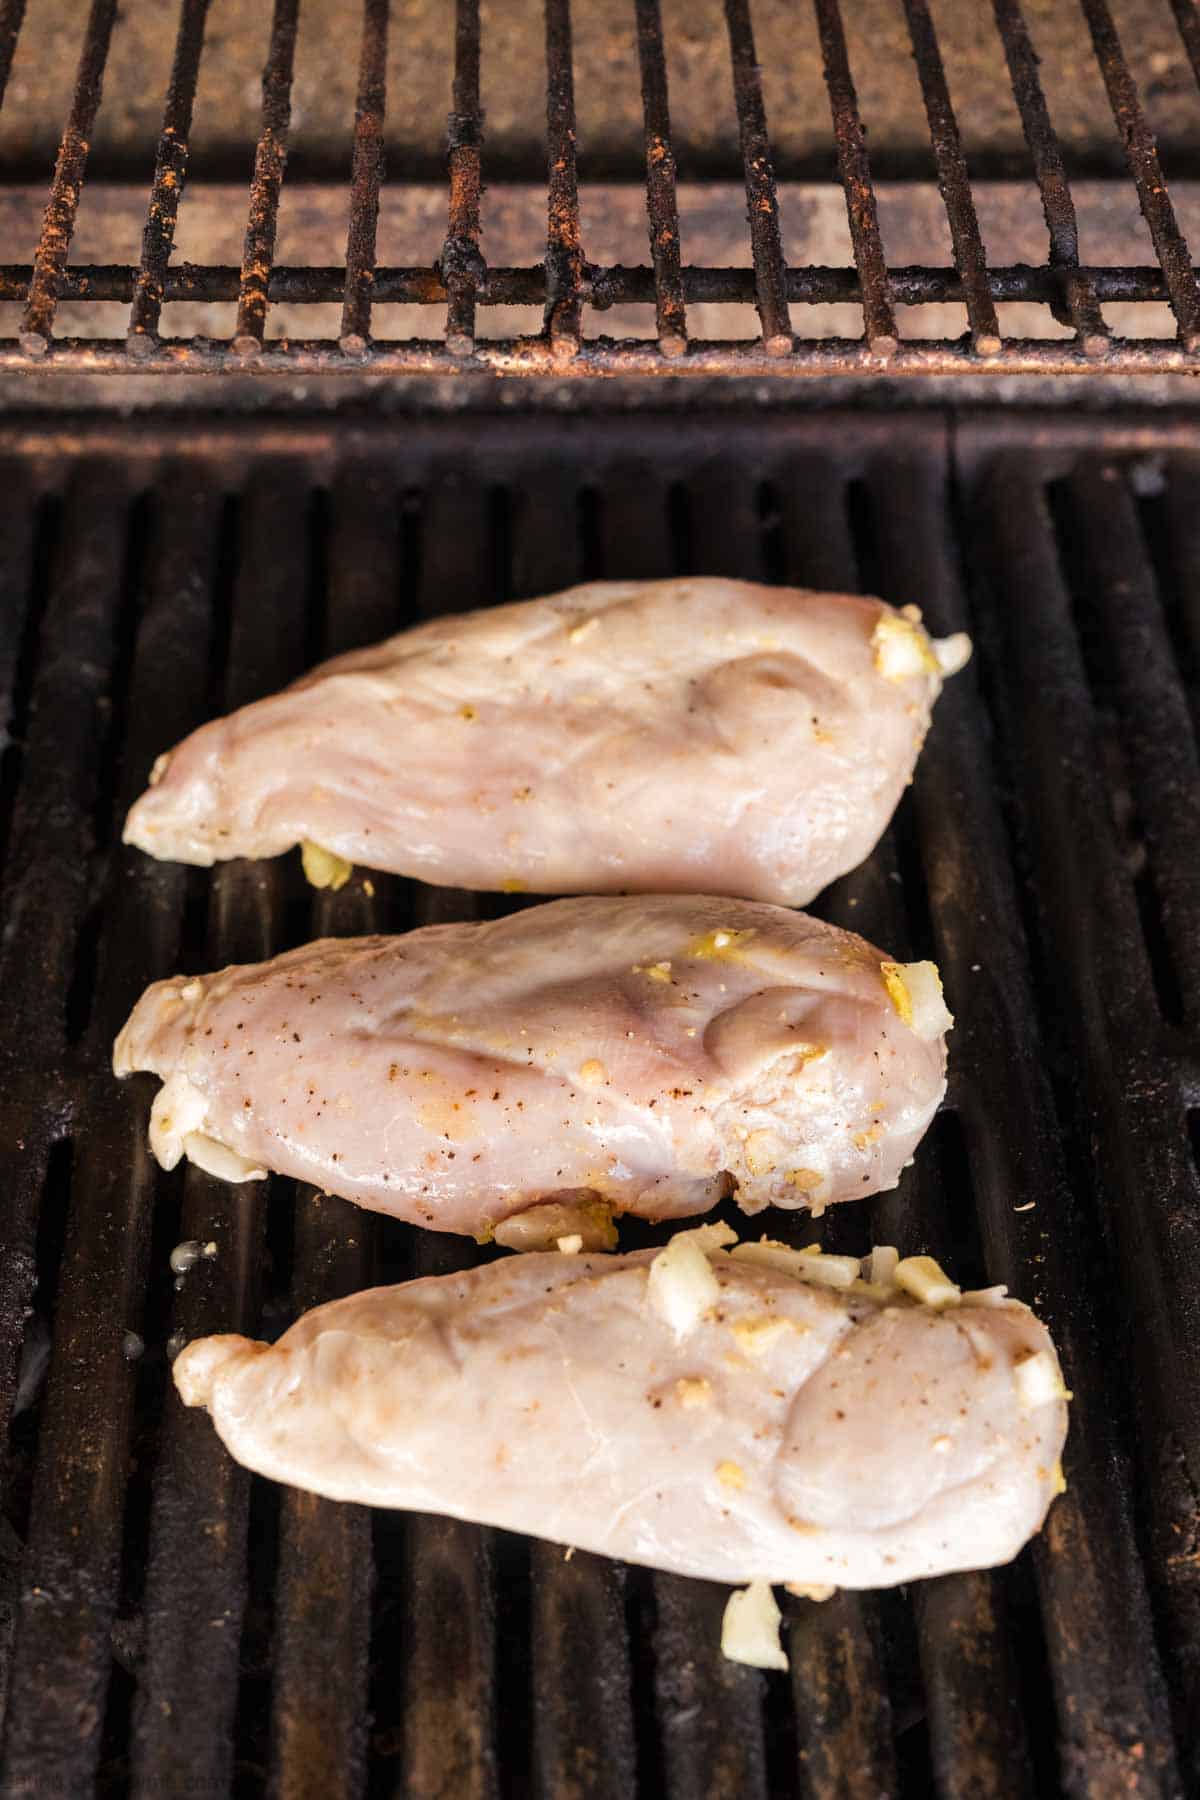 Marinated chicken breast on the grill grates